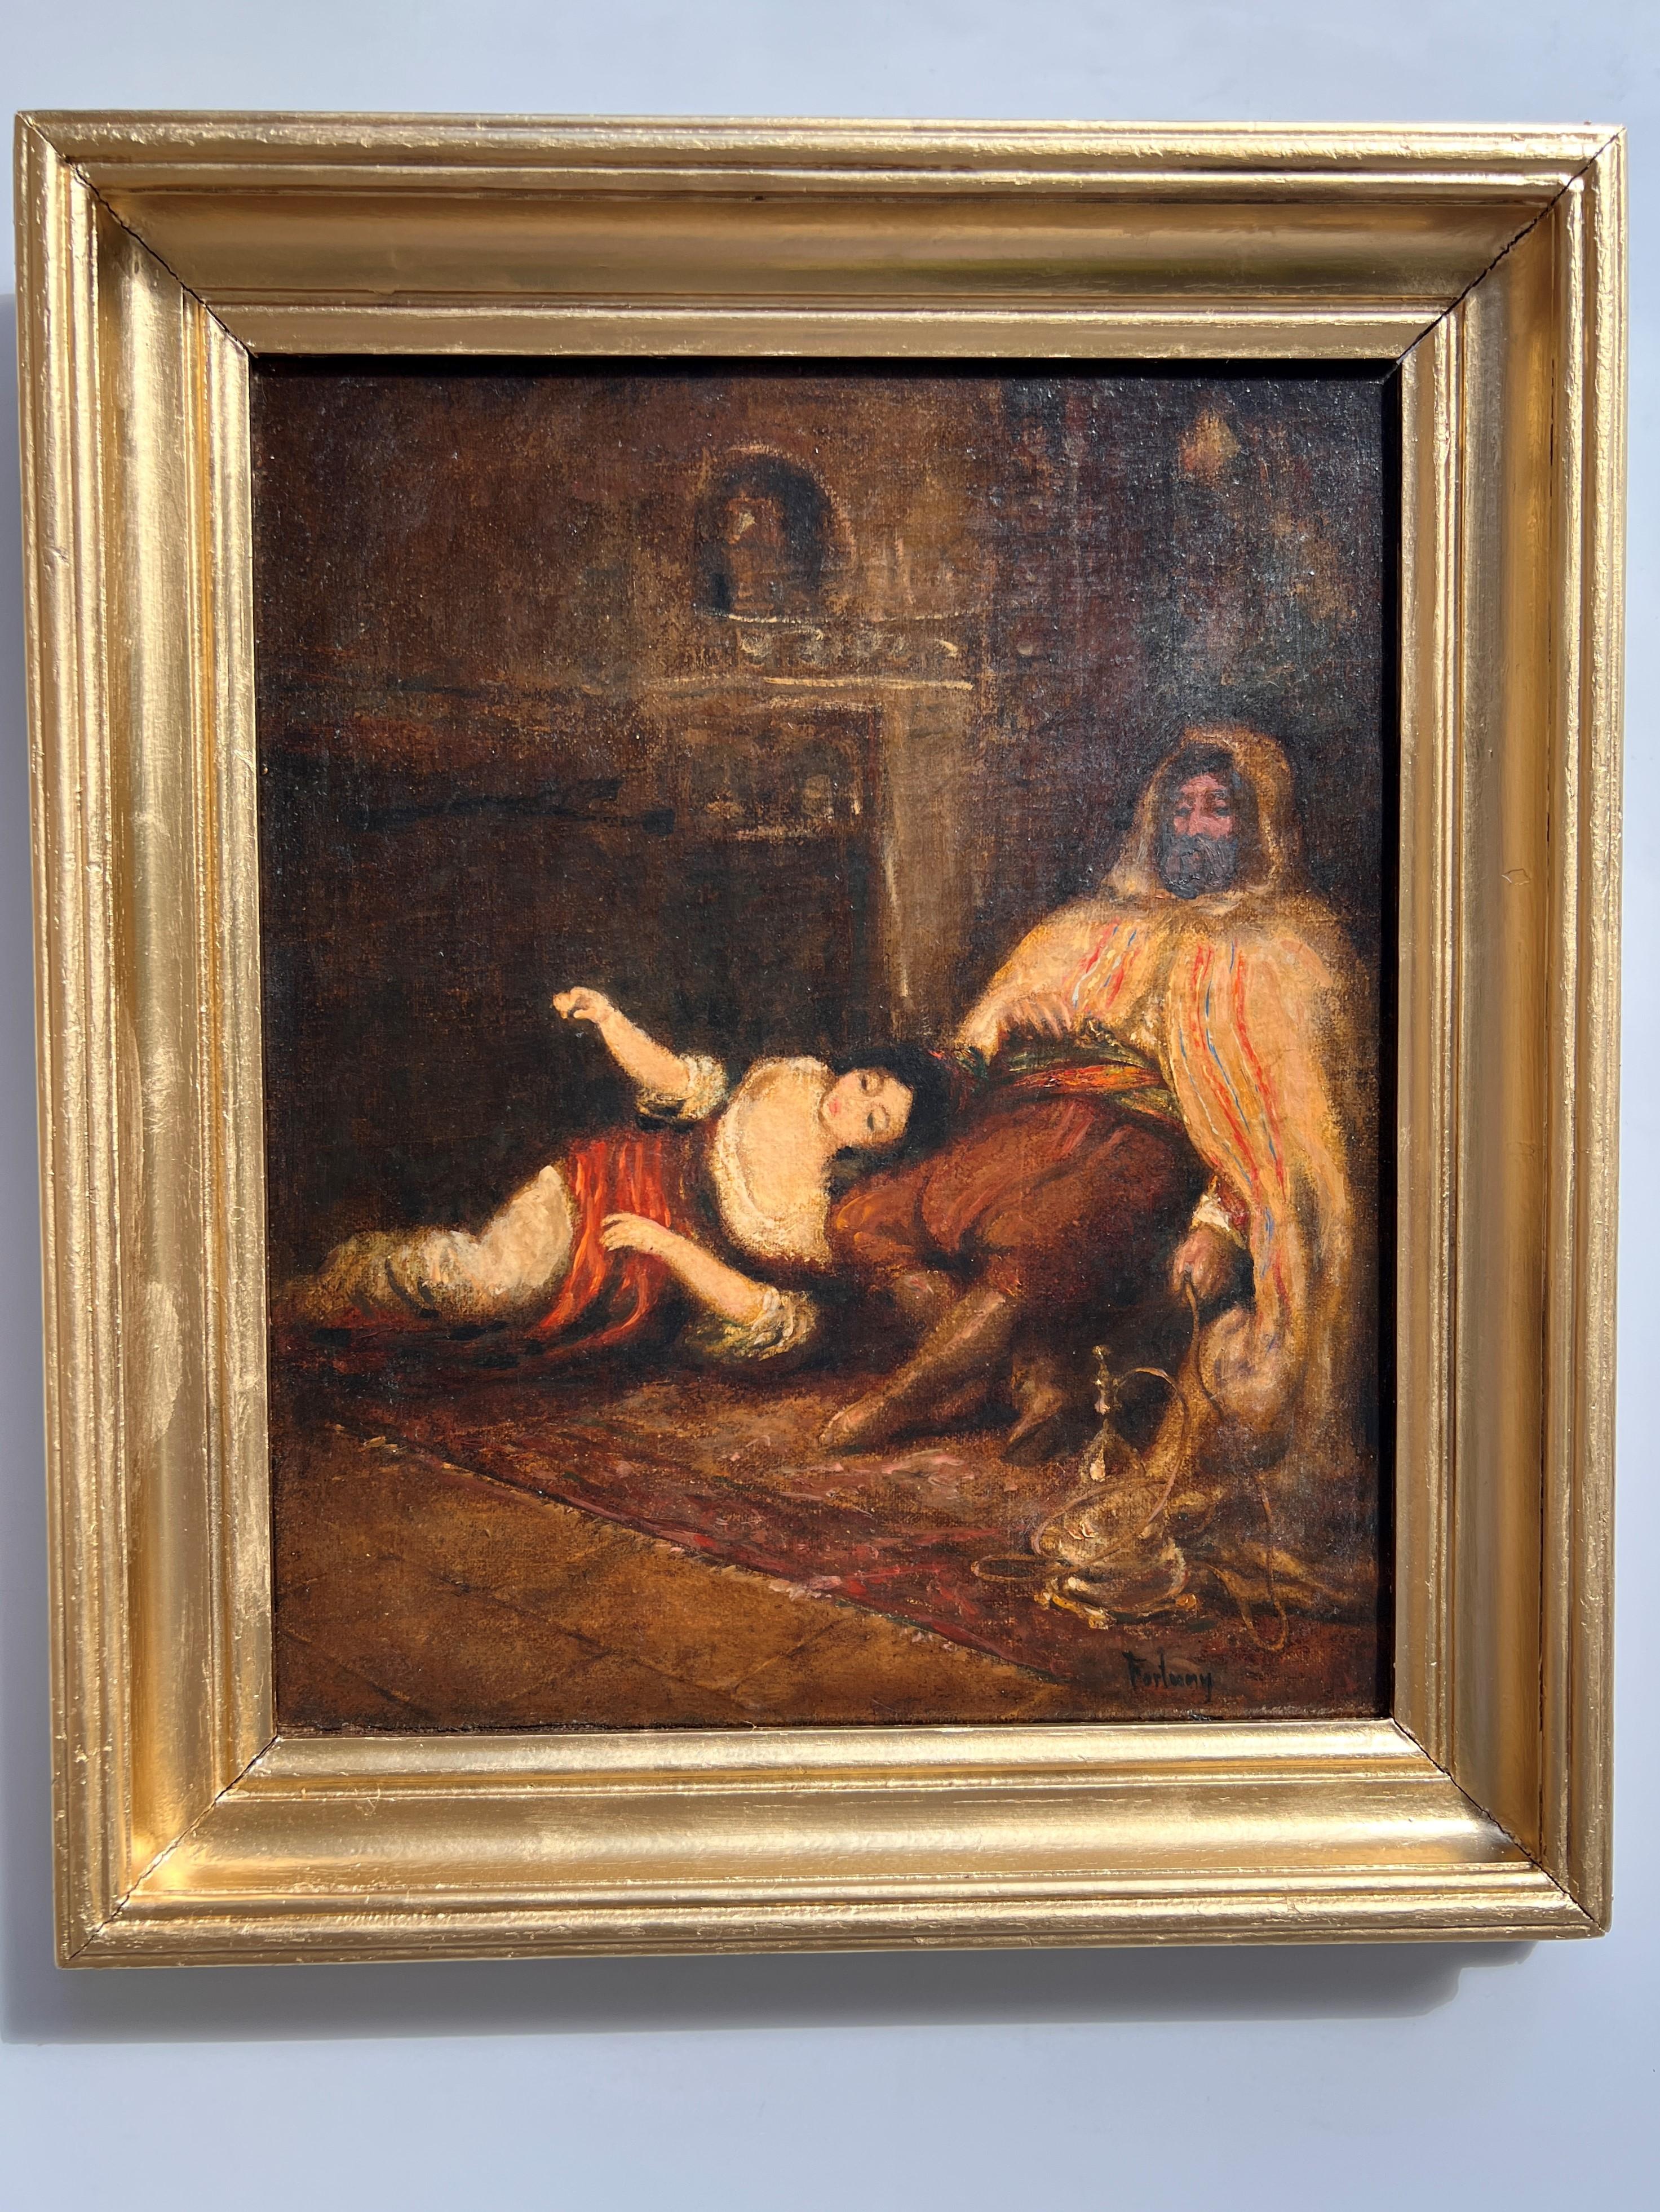 19TH C. OIL ON CANVAS, ORIENTALIST INTERIOR SCENE WITH FIGURES, SIGNED FORTUNY - Painting by Fortuny